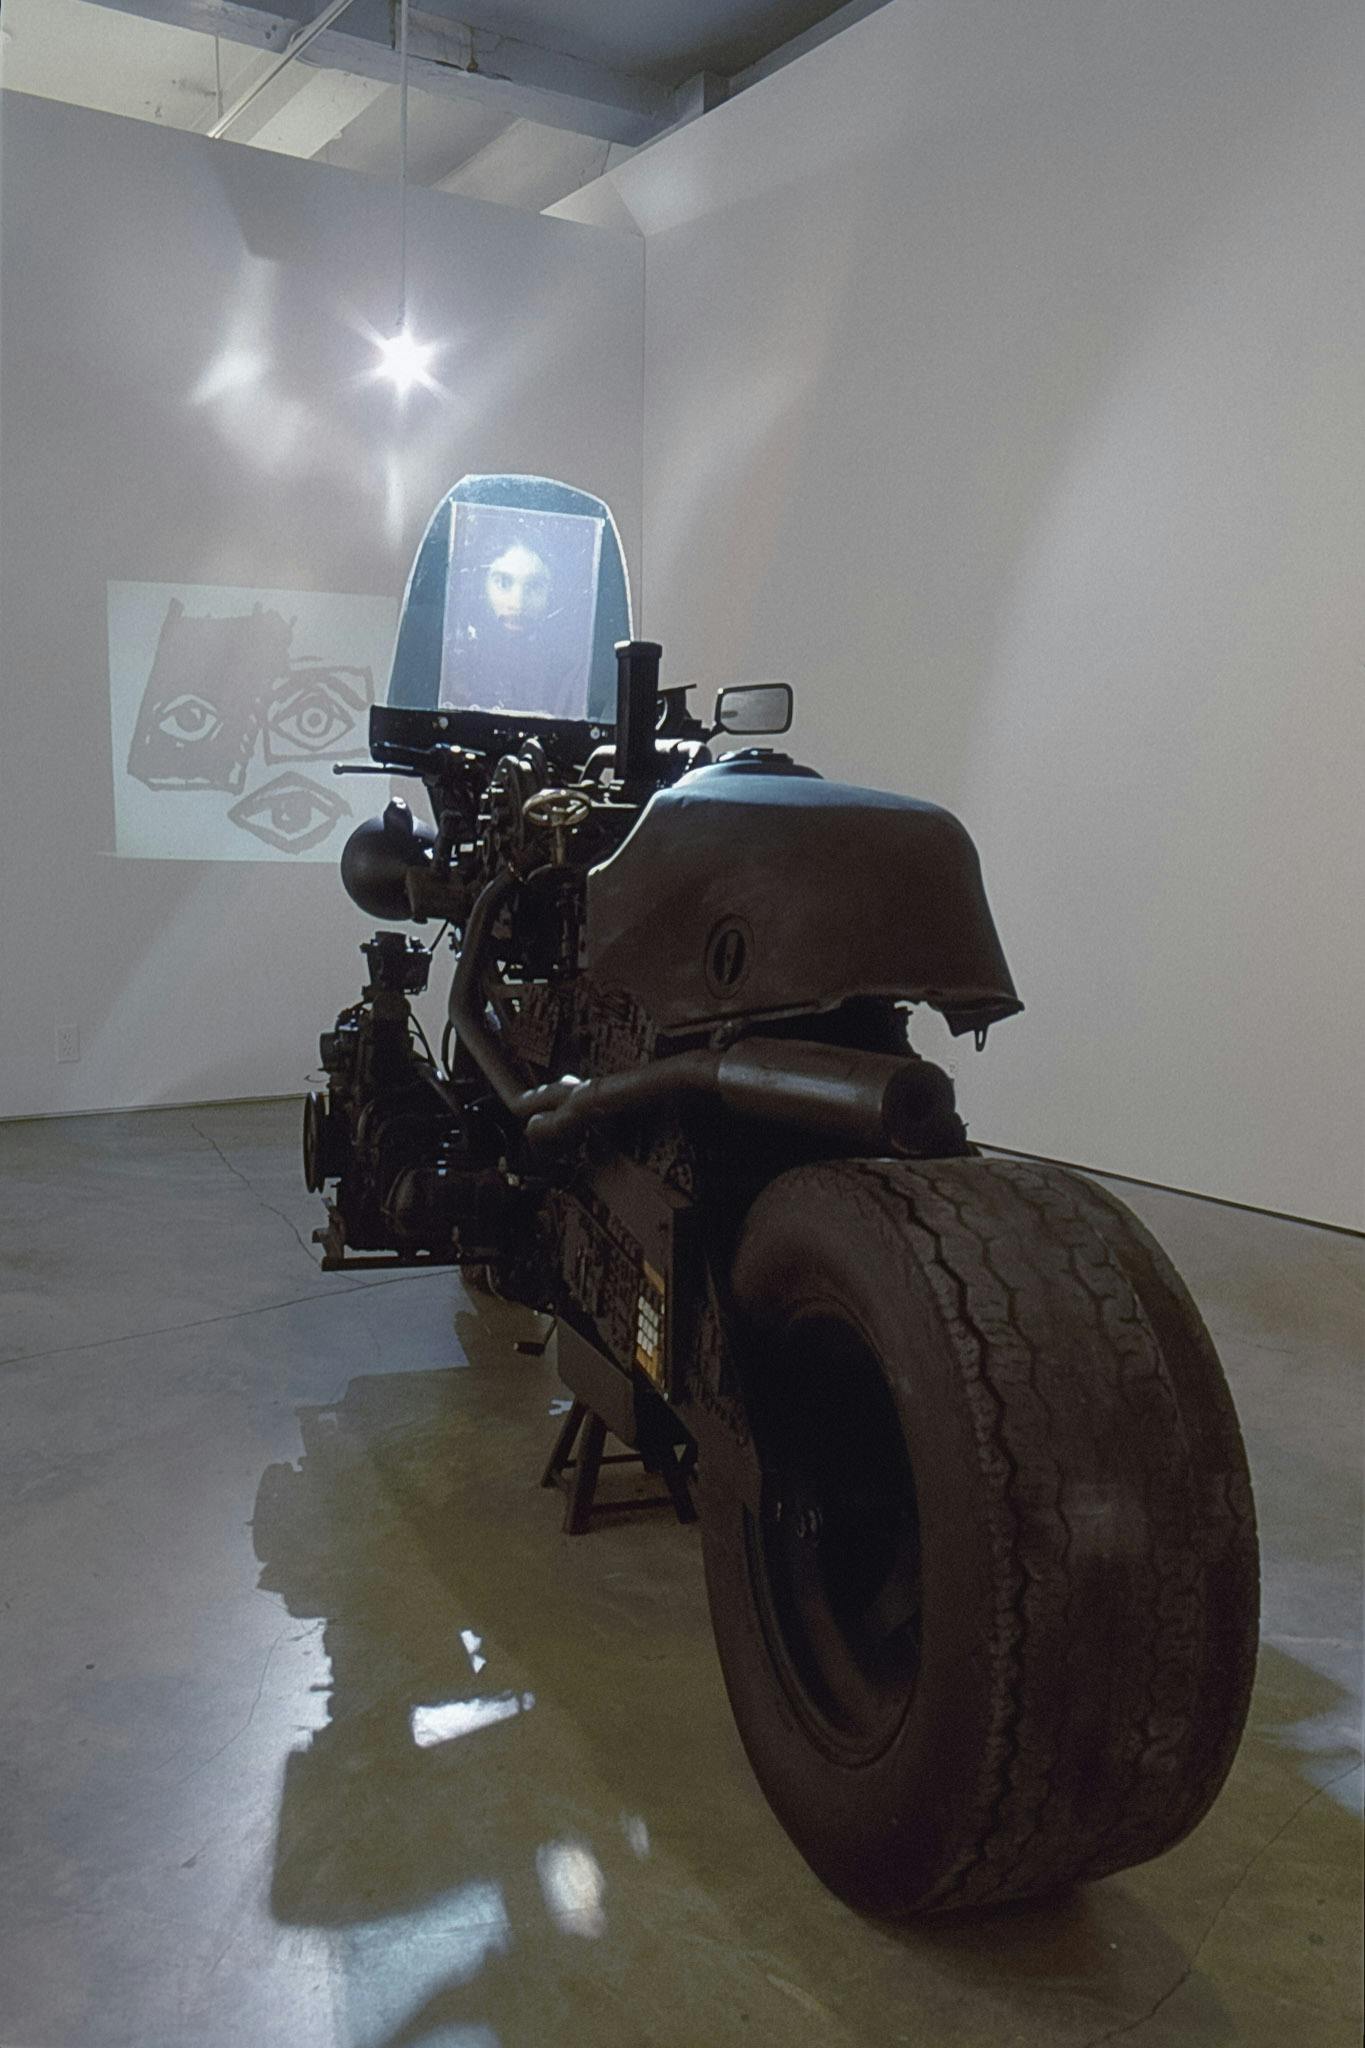 A big black motorbike is installed on a gallery floor in front of the wall, on which black and white drawings of eyes are projected. A blurred photograph of a man’s face is attached to the bike's front. 